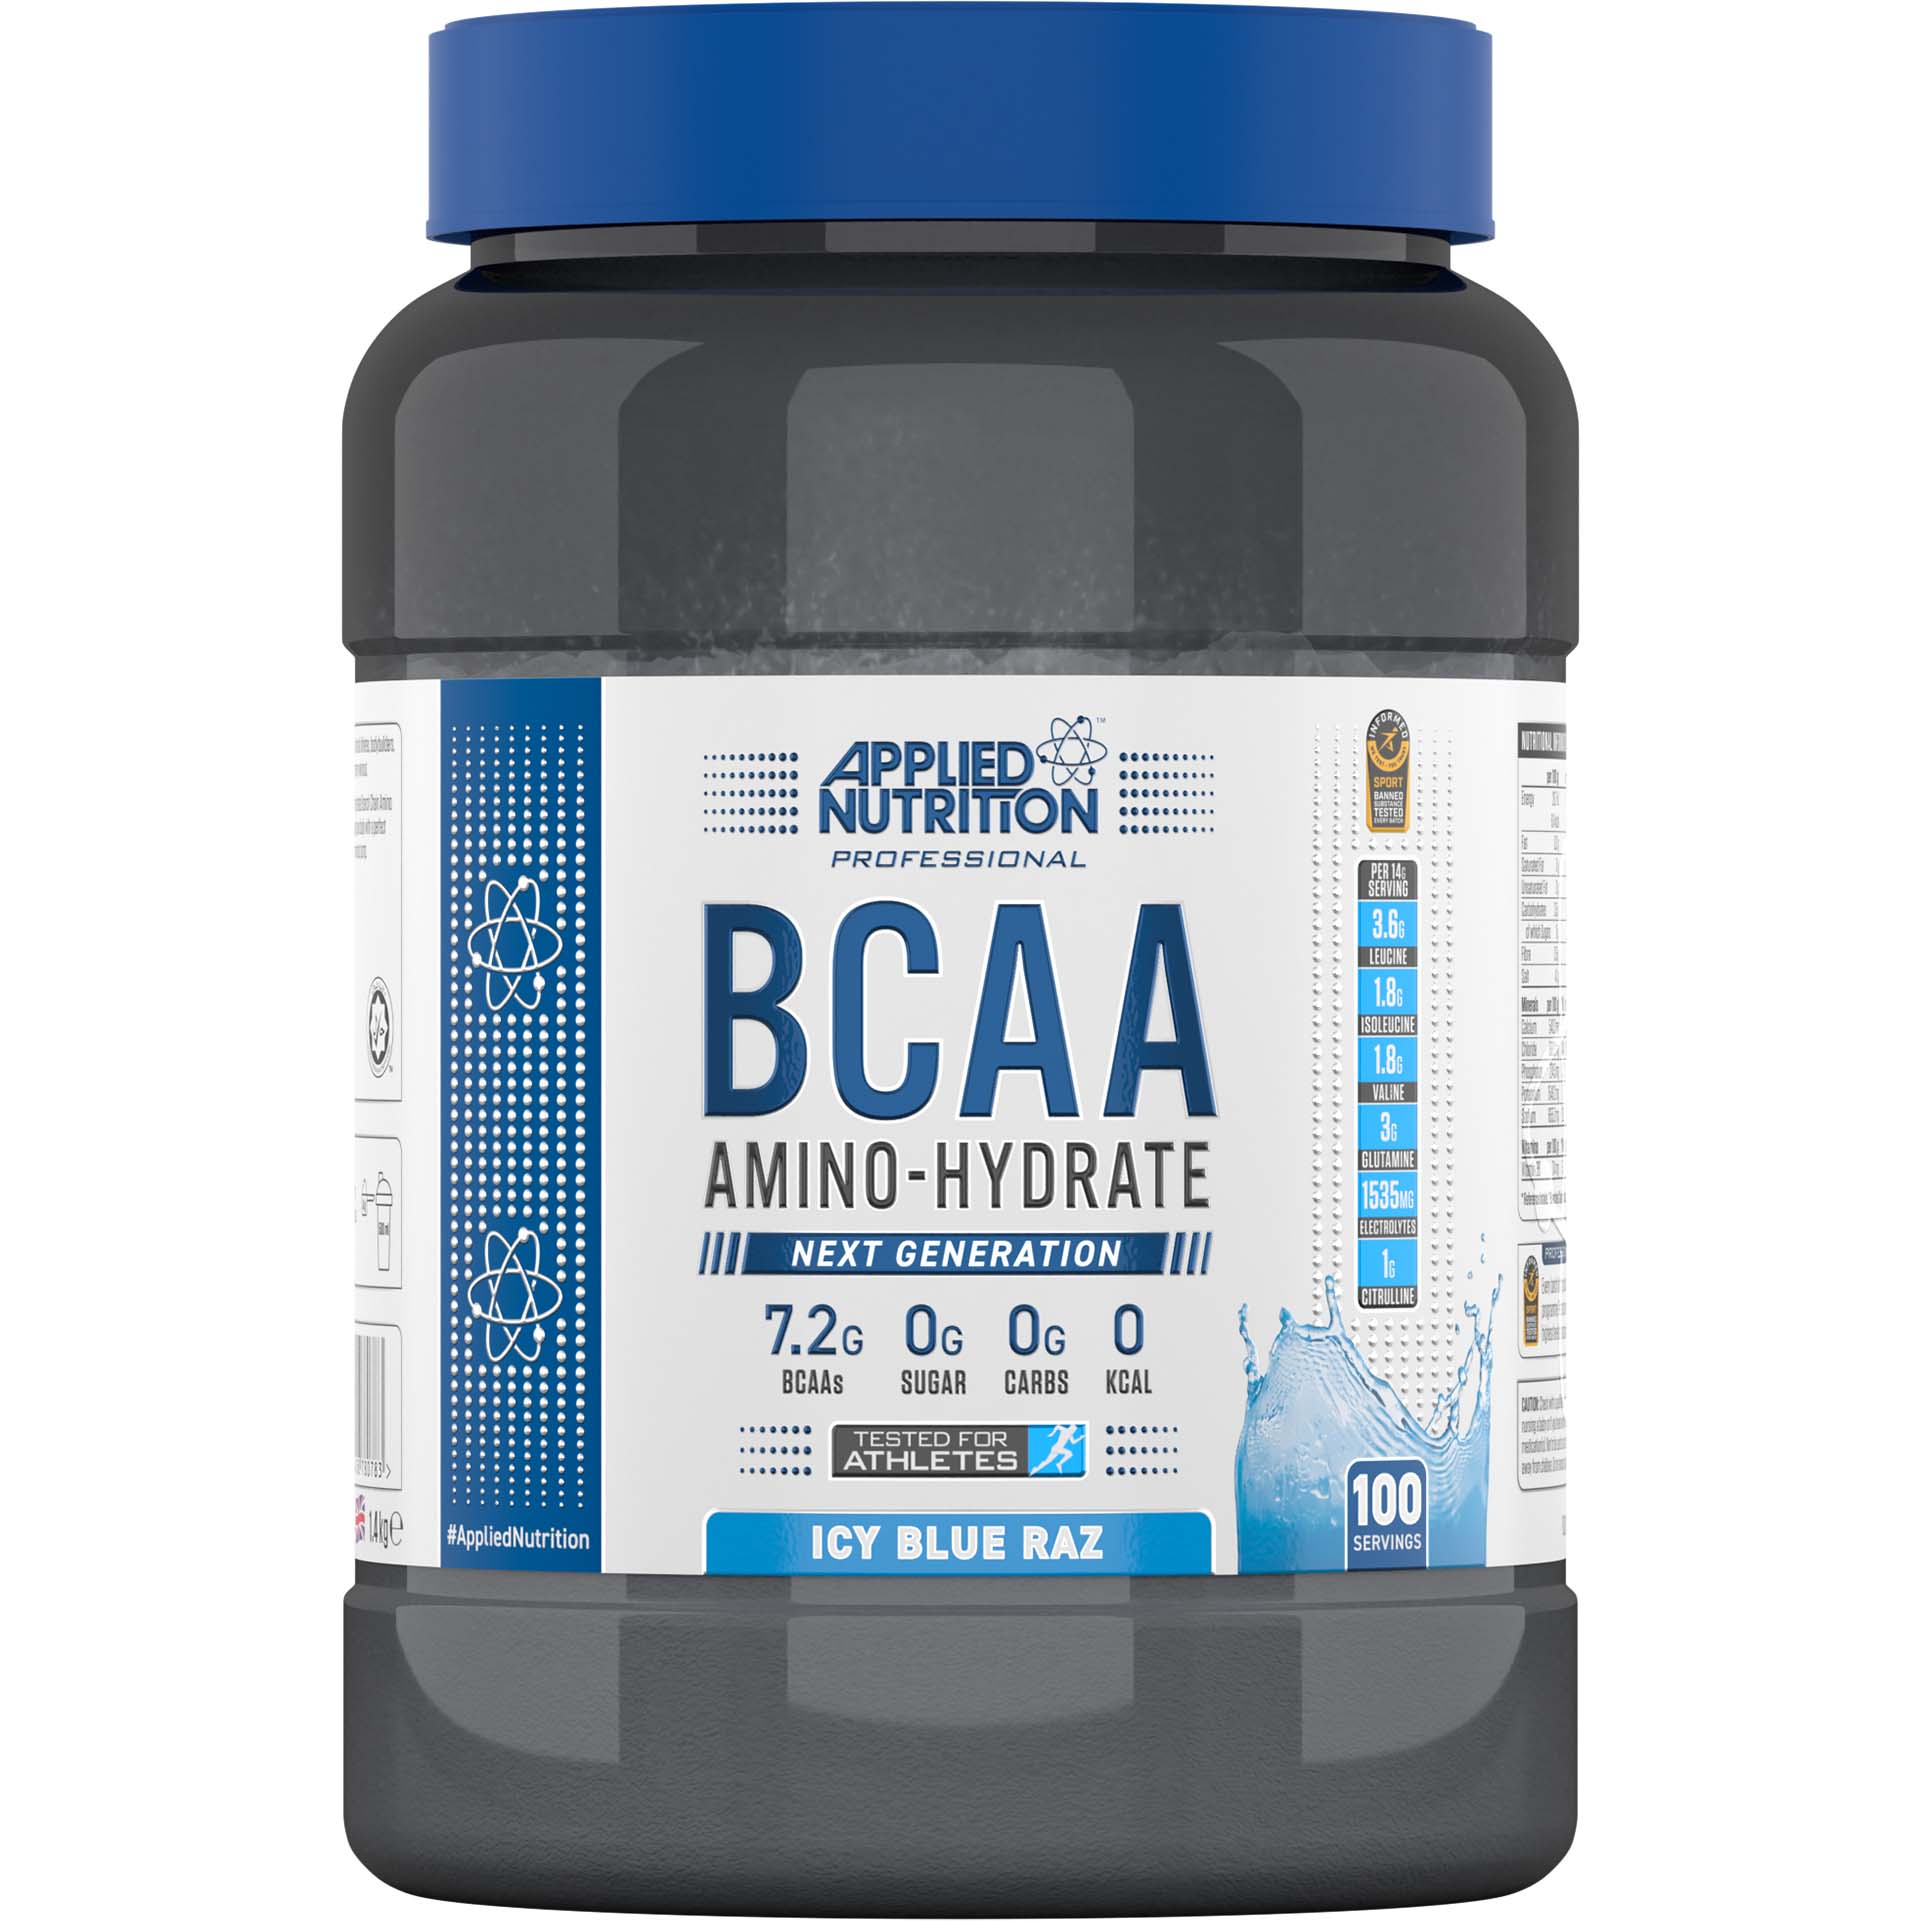 Applied Nutrition BCAA Amino Hydrate, Icy Blue Raz, 100 Serving